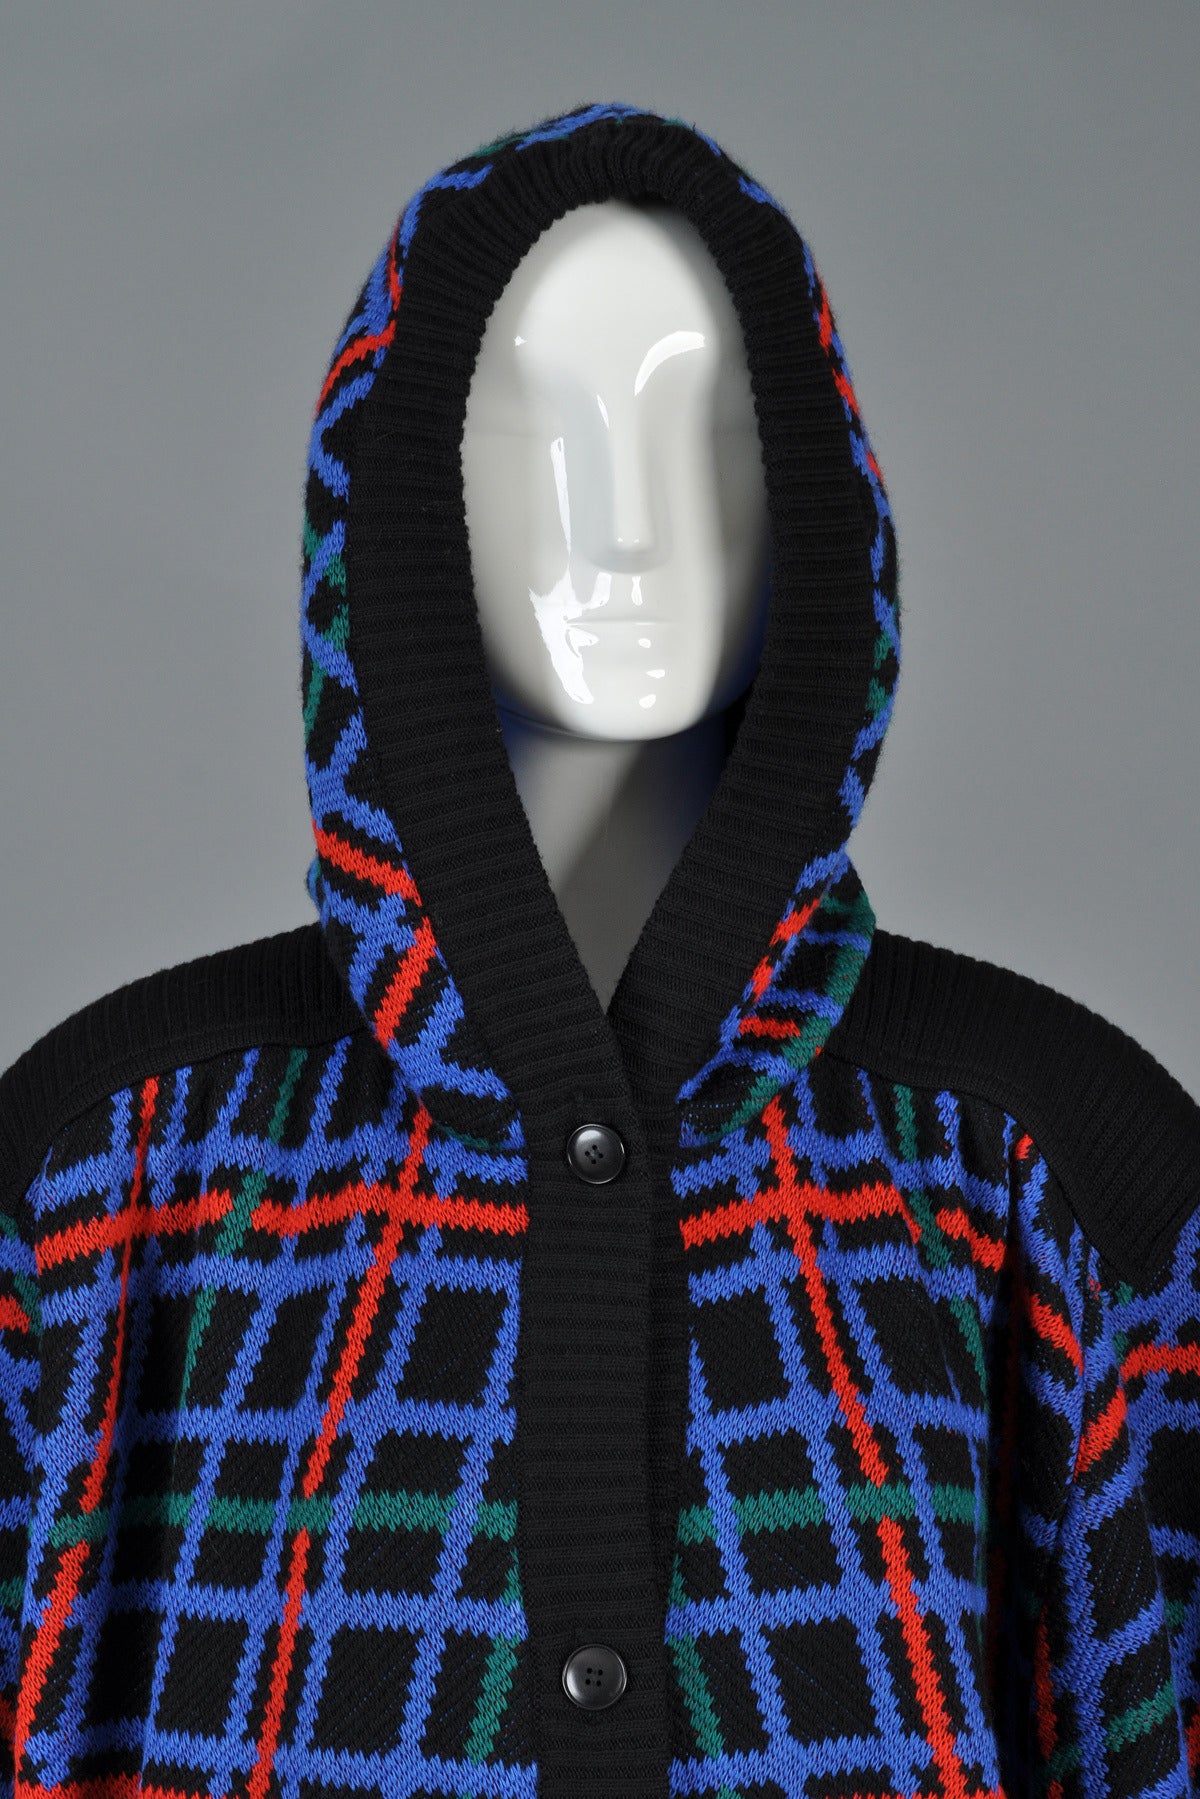 Women's Yves Saint Laurent 1980s Plaid Hooded Knit Cocoon Jacket